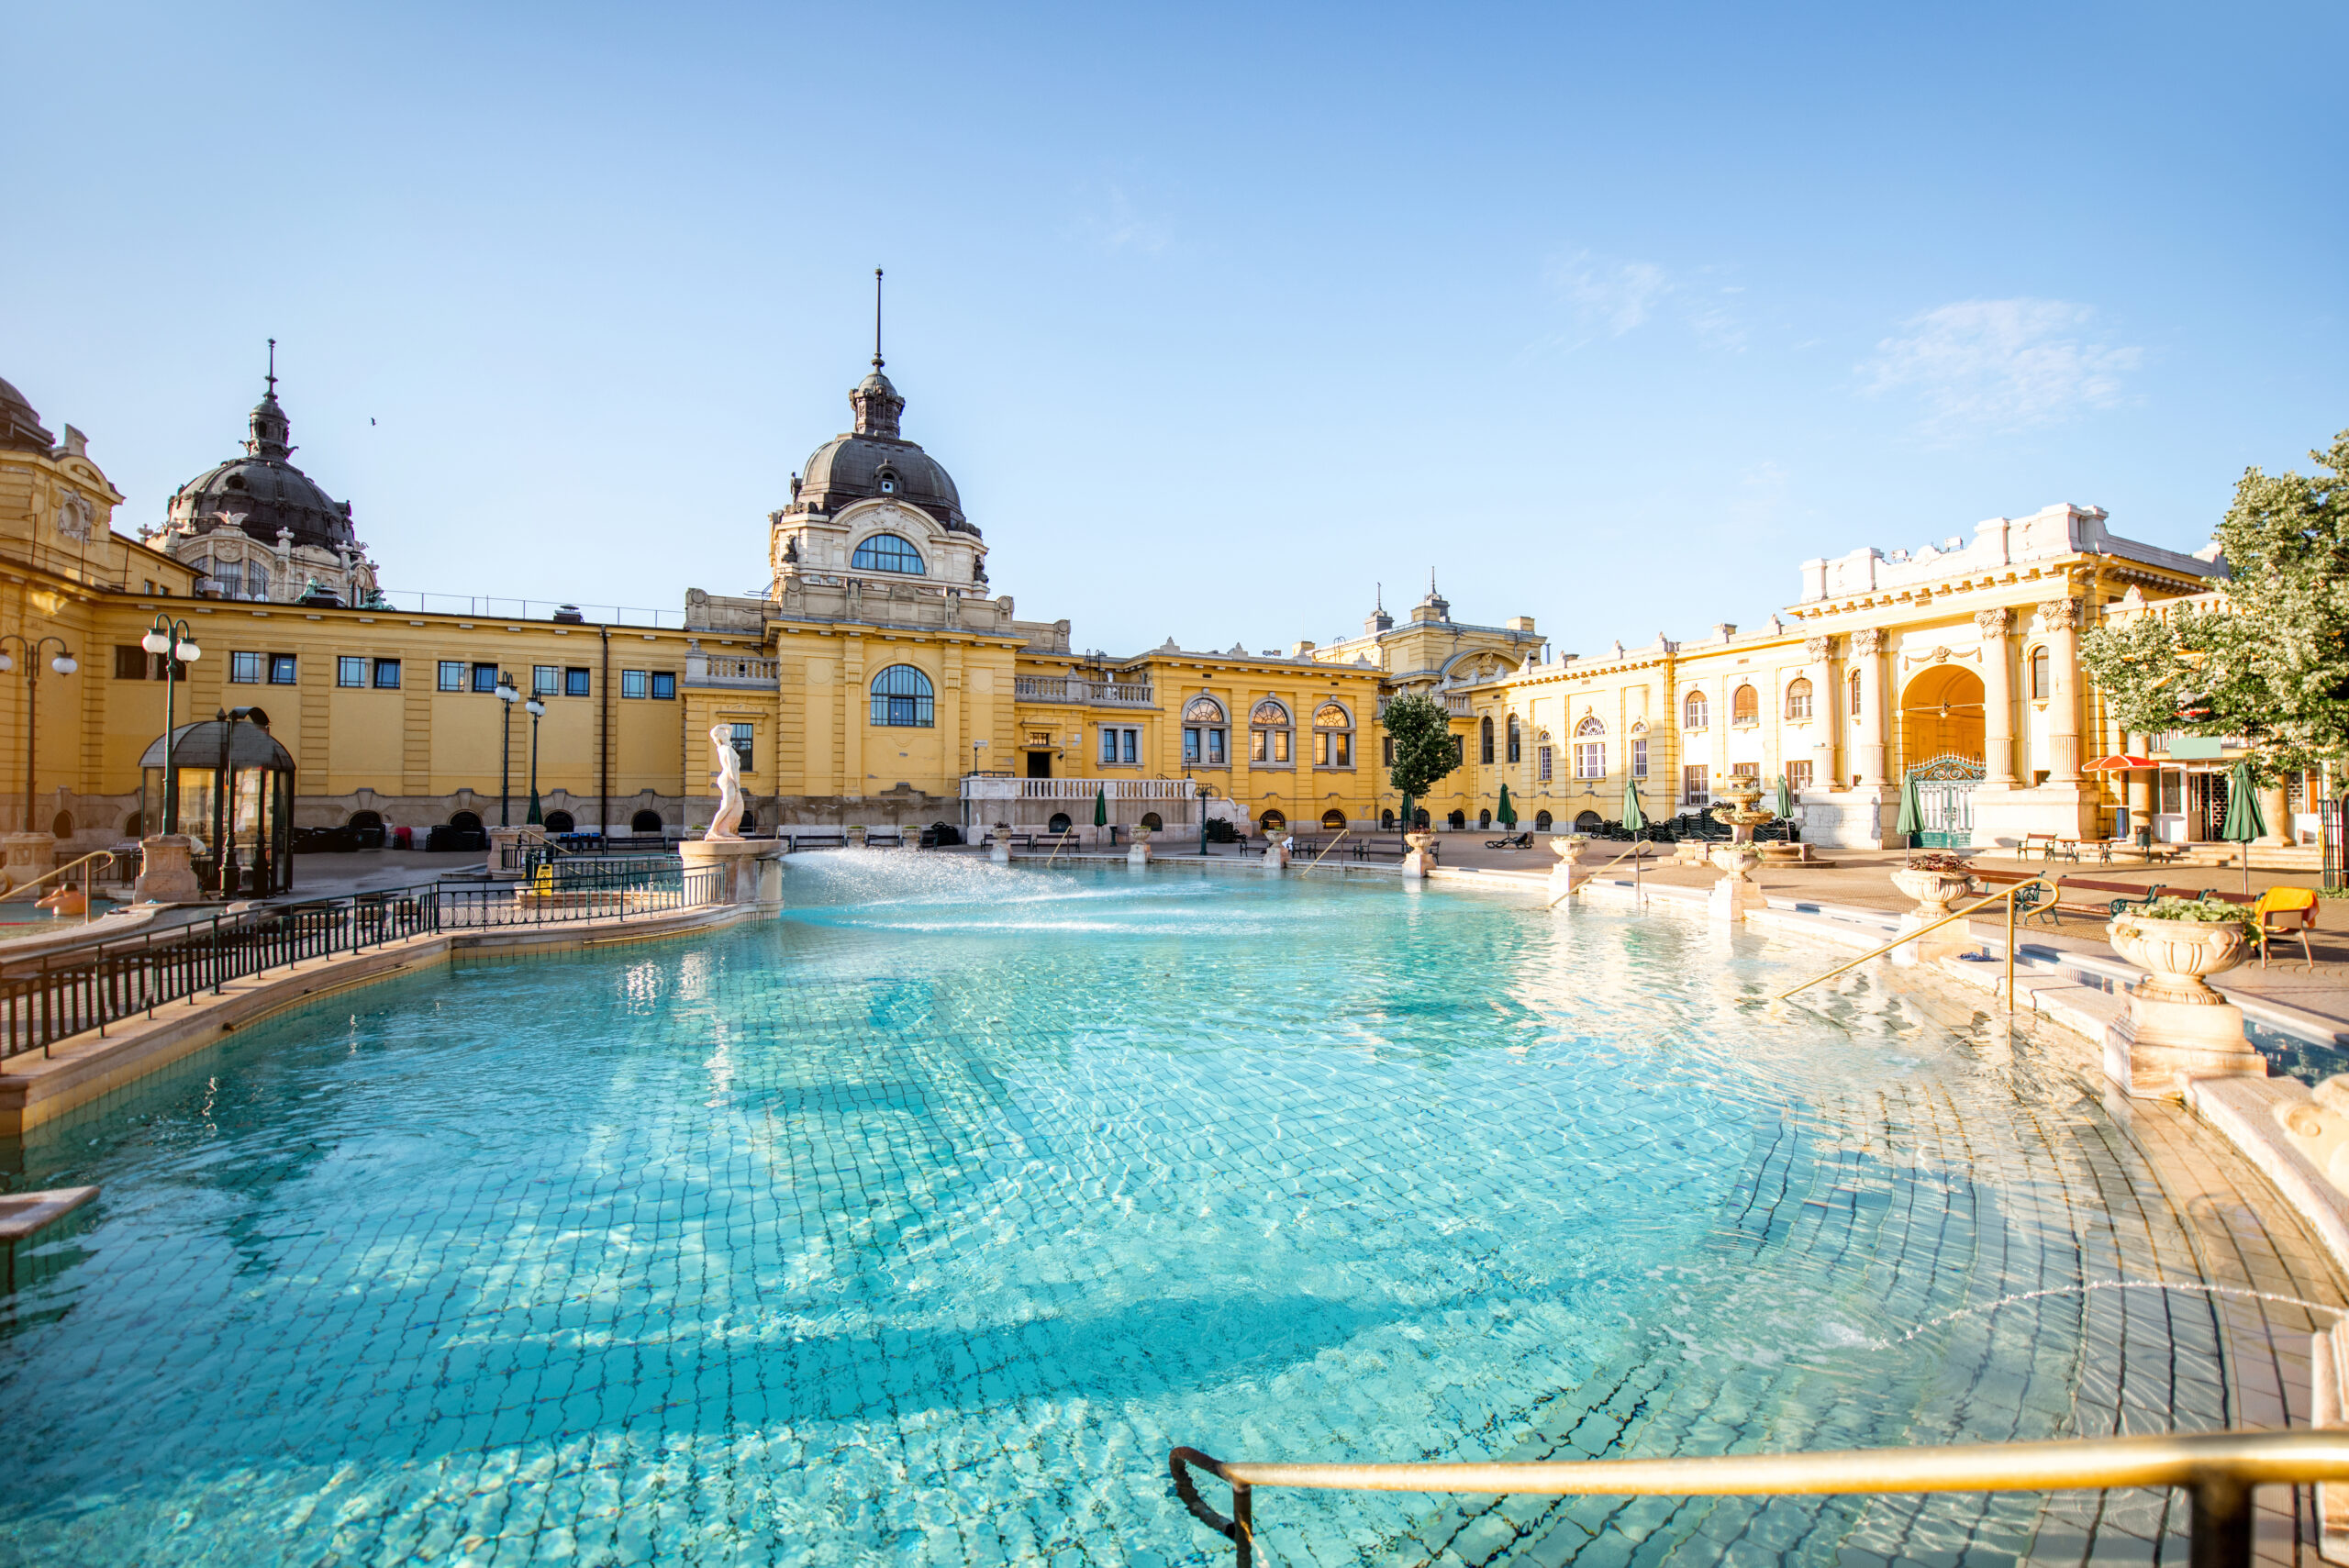 Outdoor thermal baths